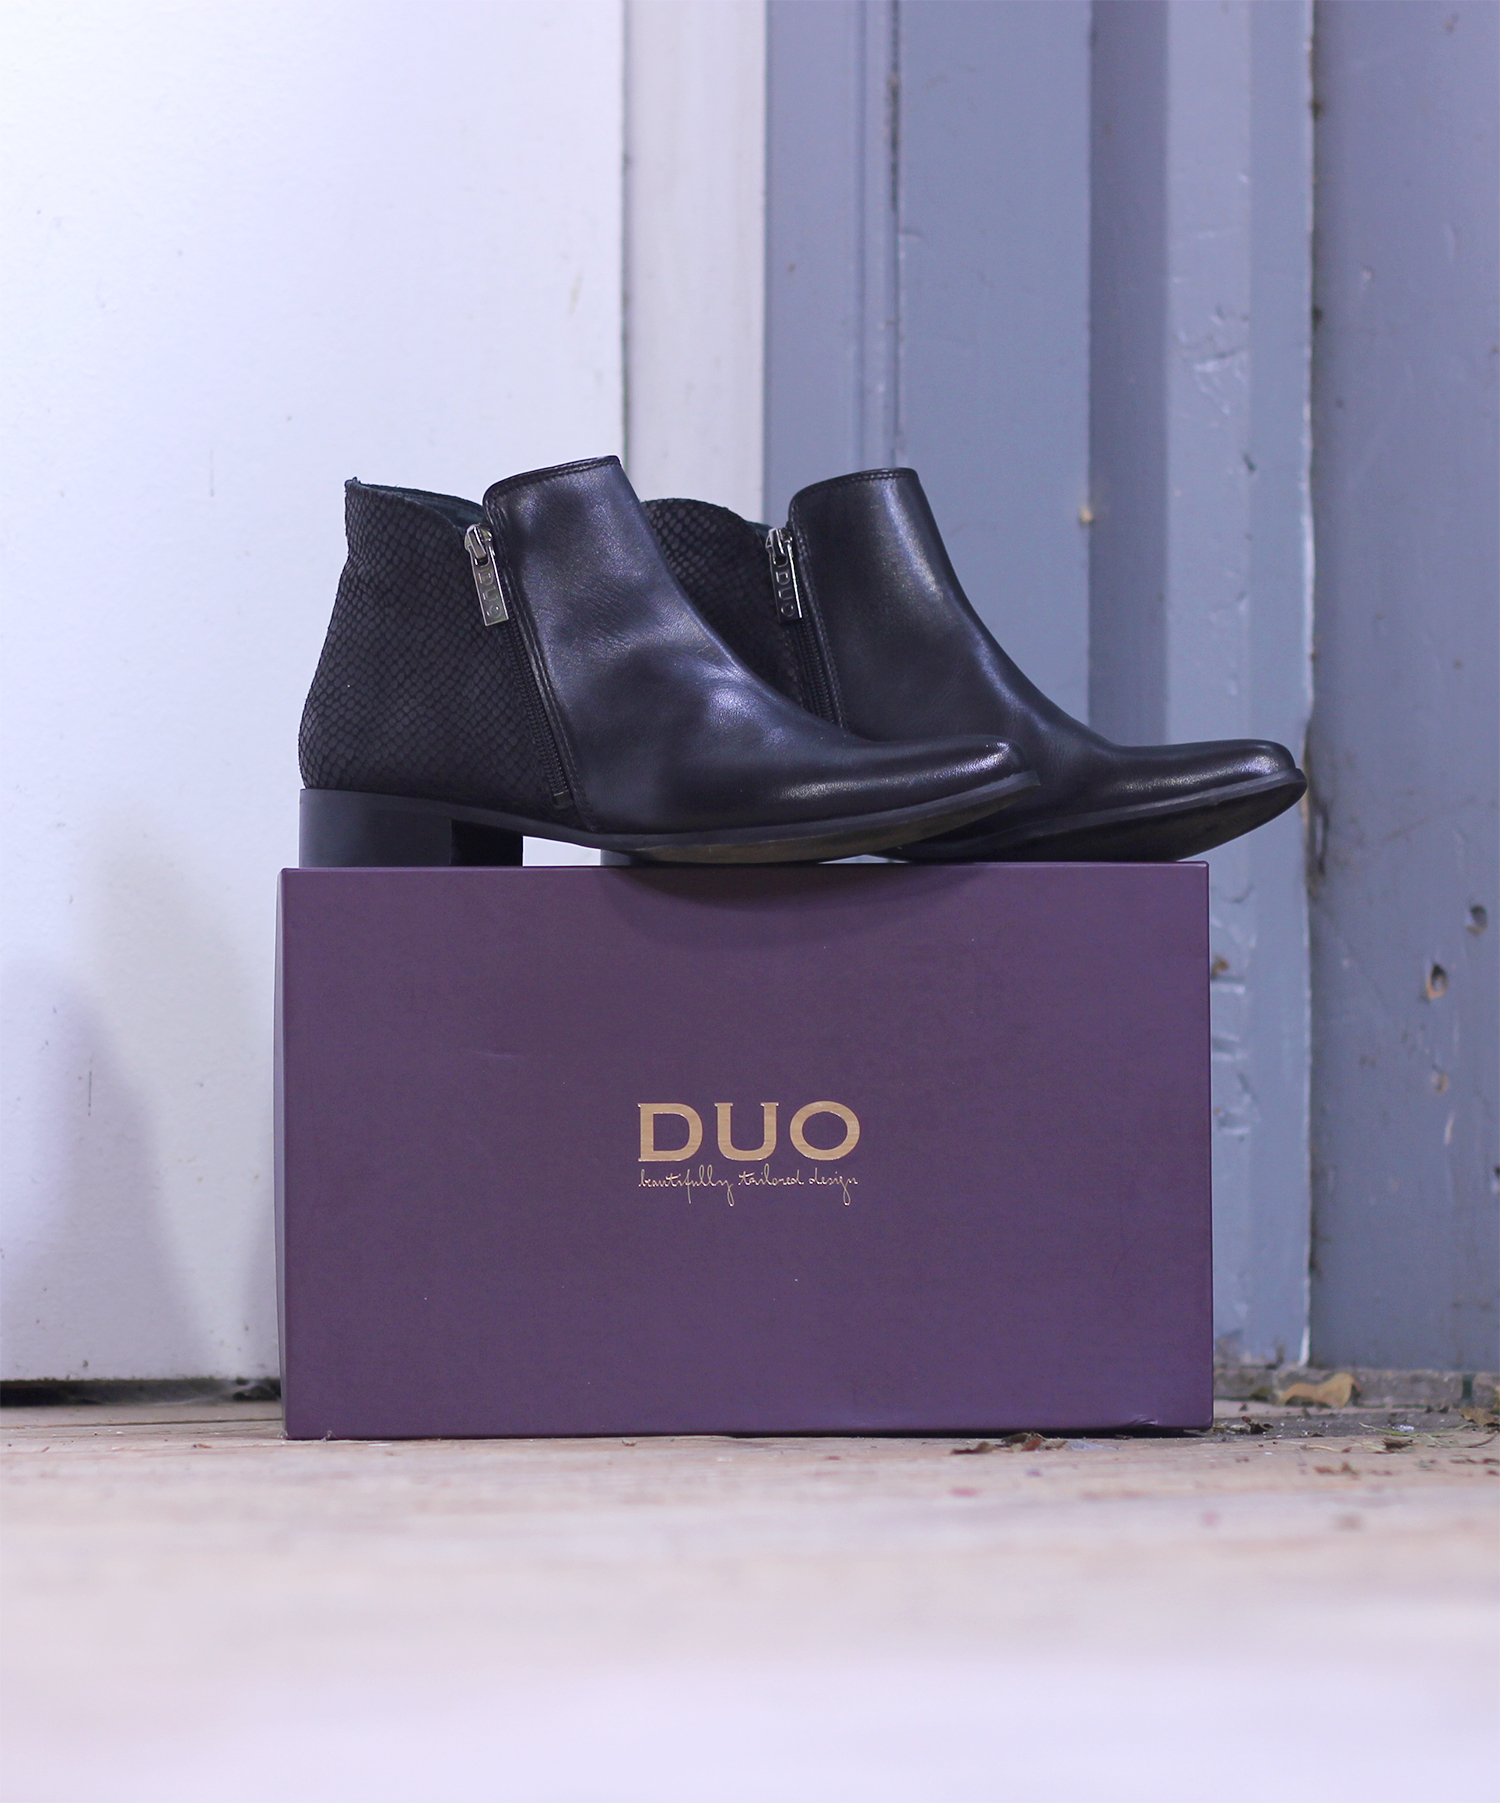 DUO boots enkellaarsjes AXIL op maar Brits review outfit lifestyle by linda mode fashion